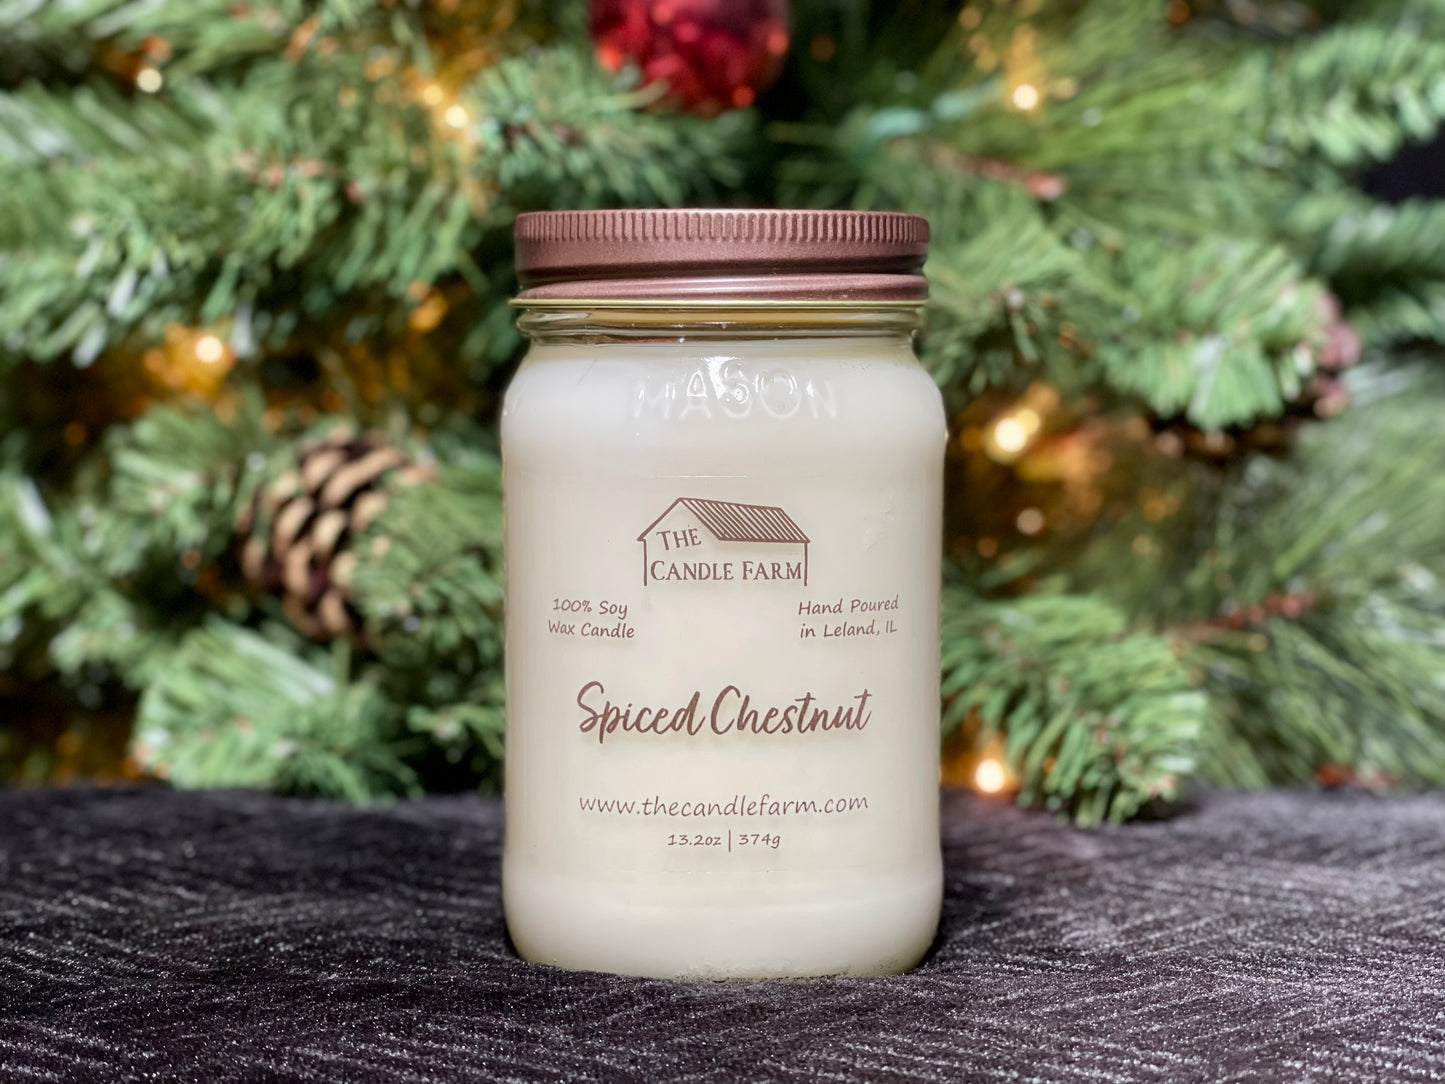 Spiced Chestnut 16 oz candle